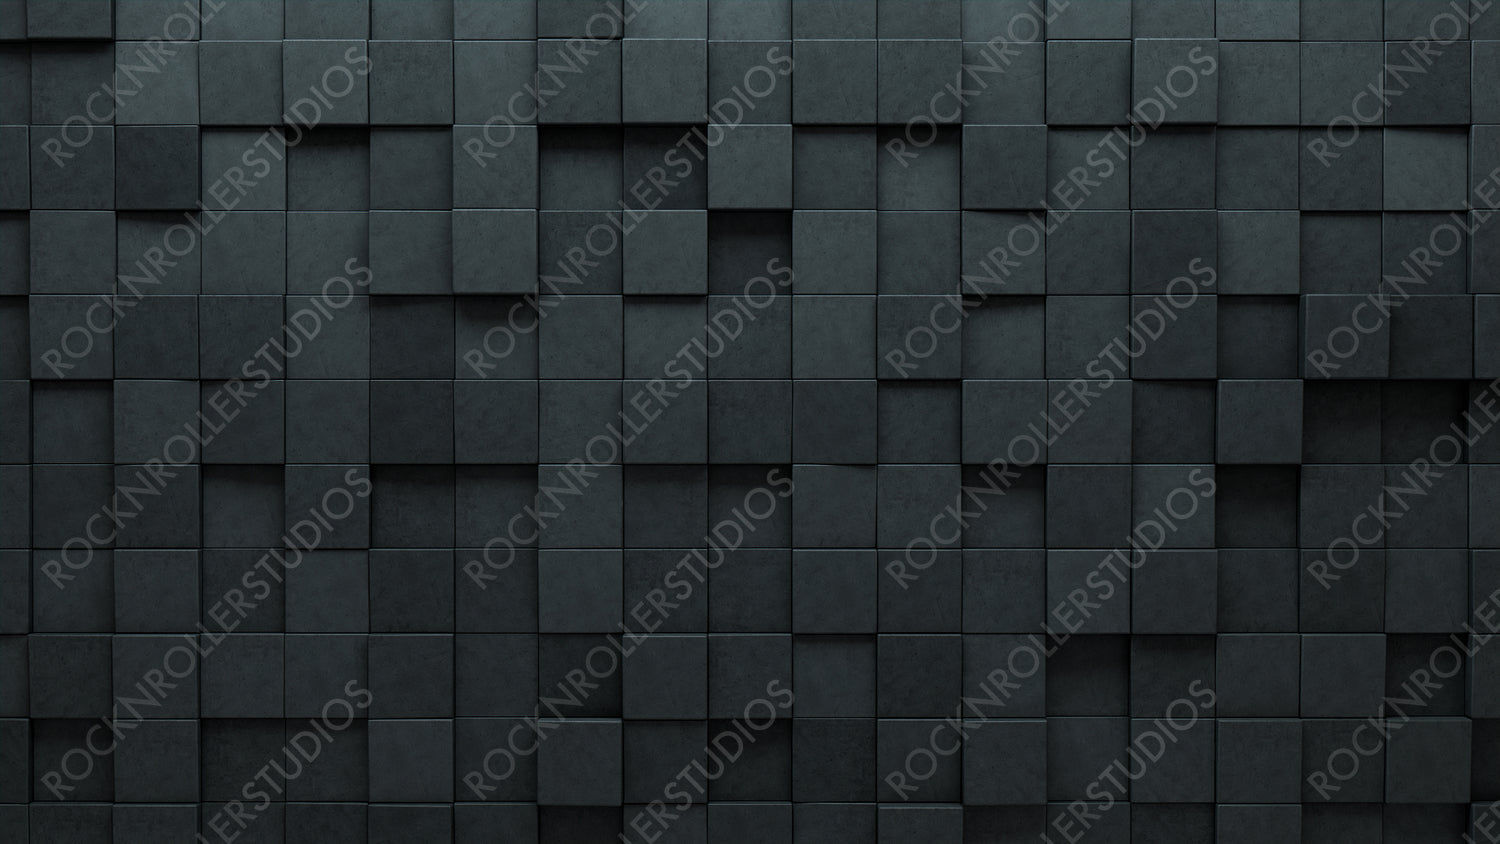 Polished, Concrete Wall background with tiles. Square, tile Wallpaper with 3D, Semigloss blocks. 3D Render